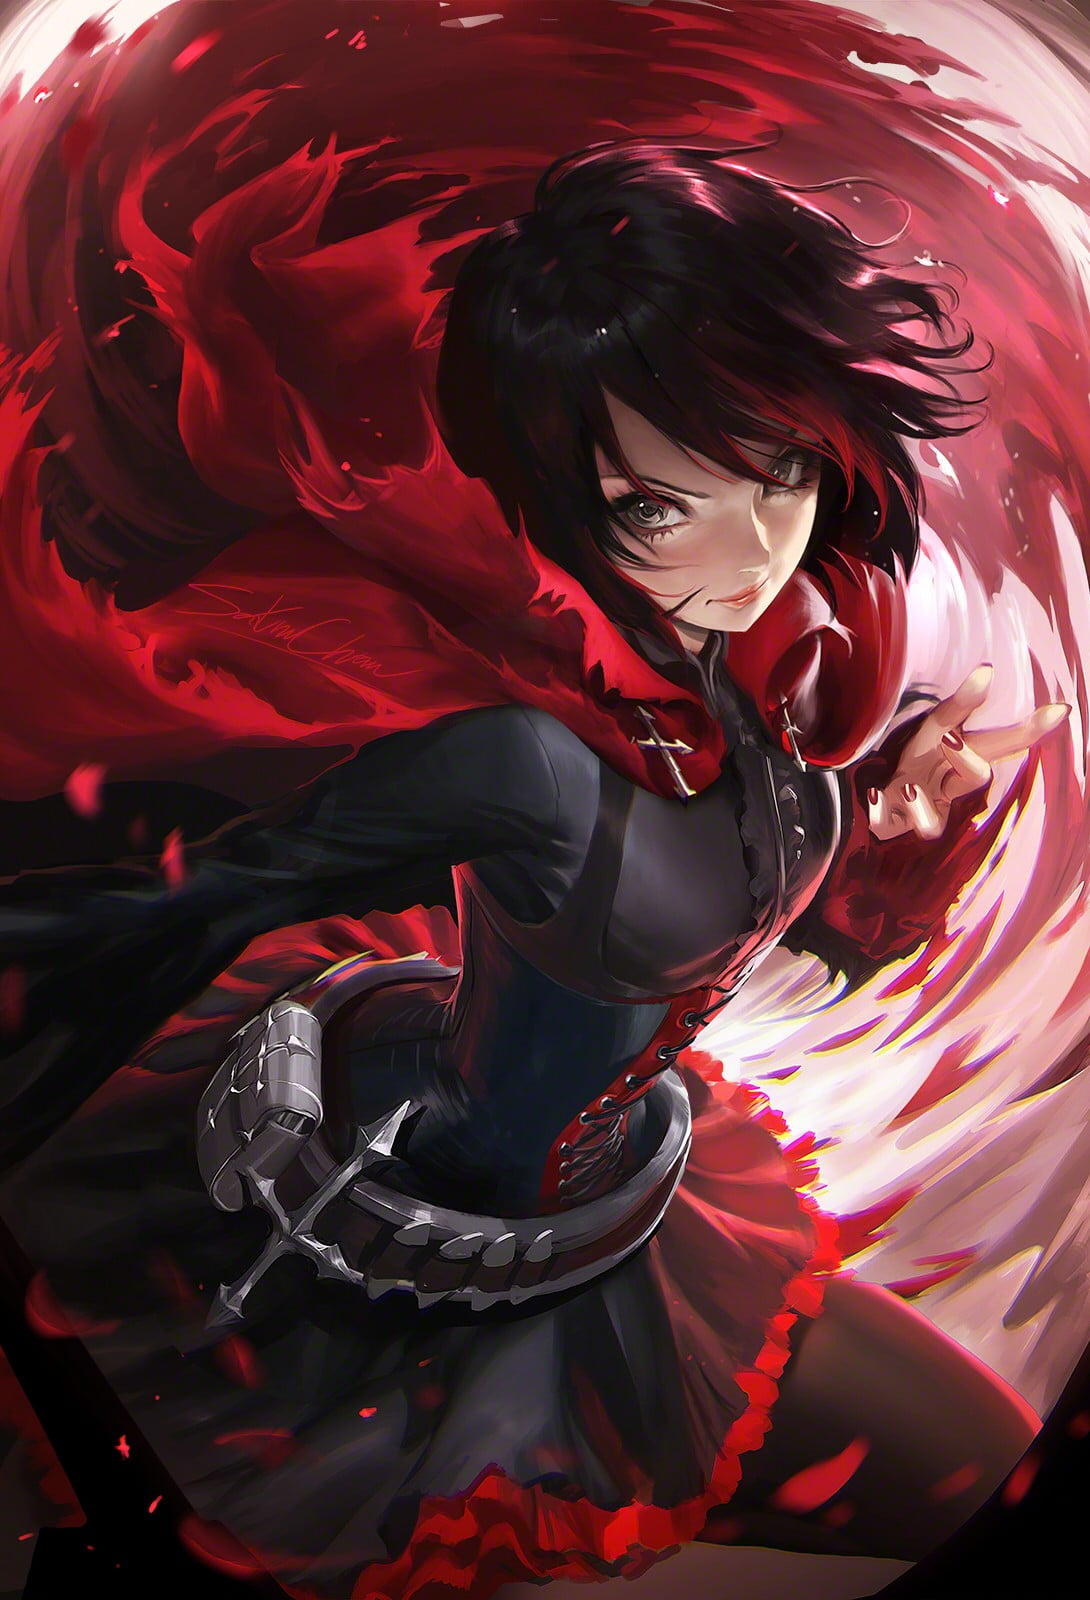 Ruby rose anime character pretty